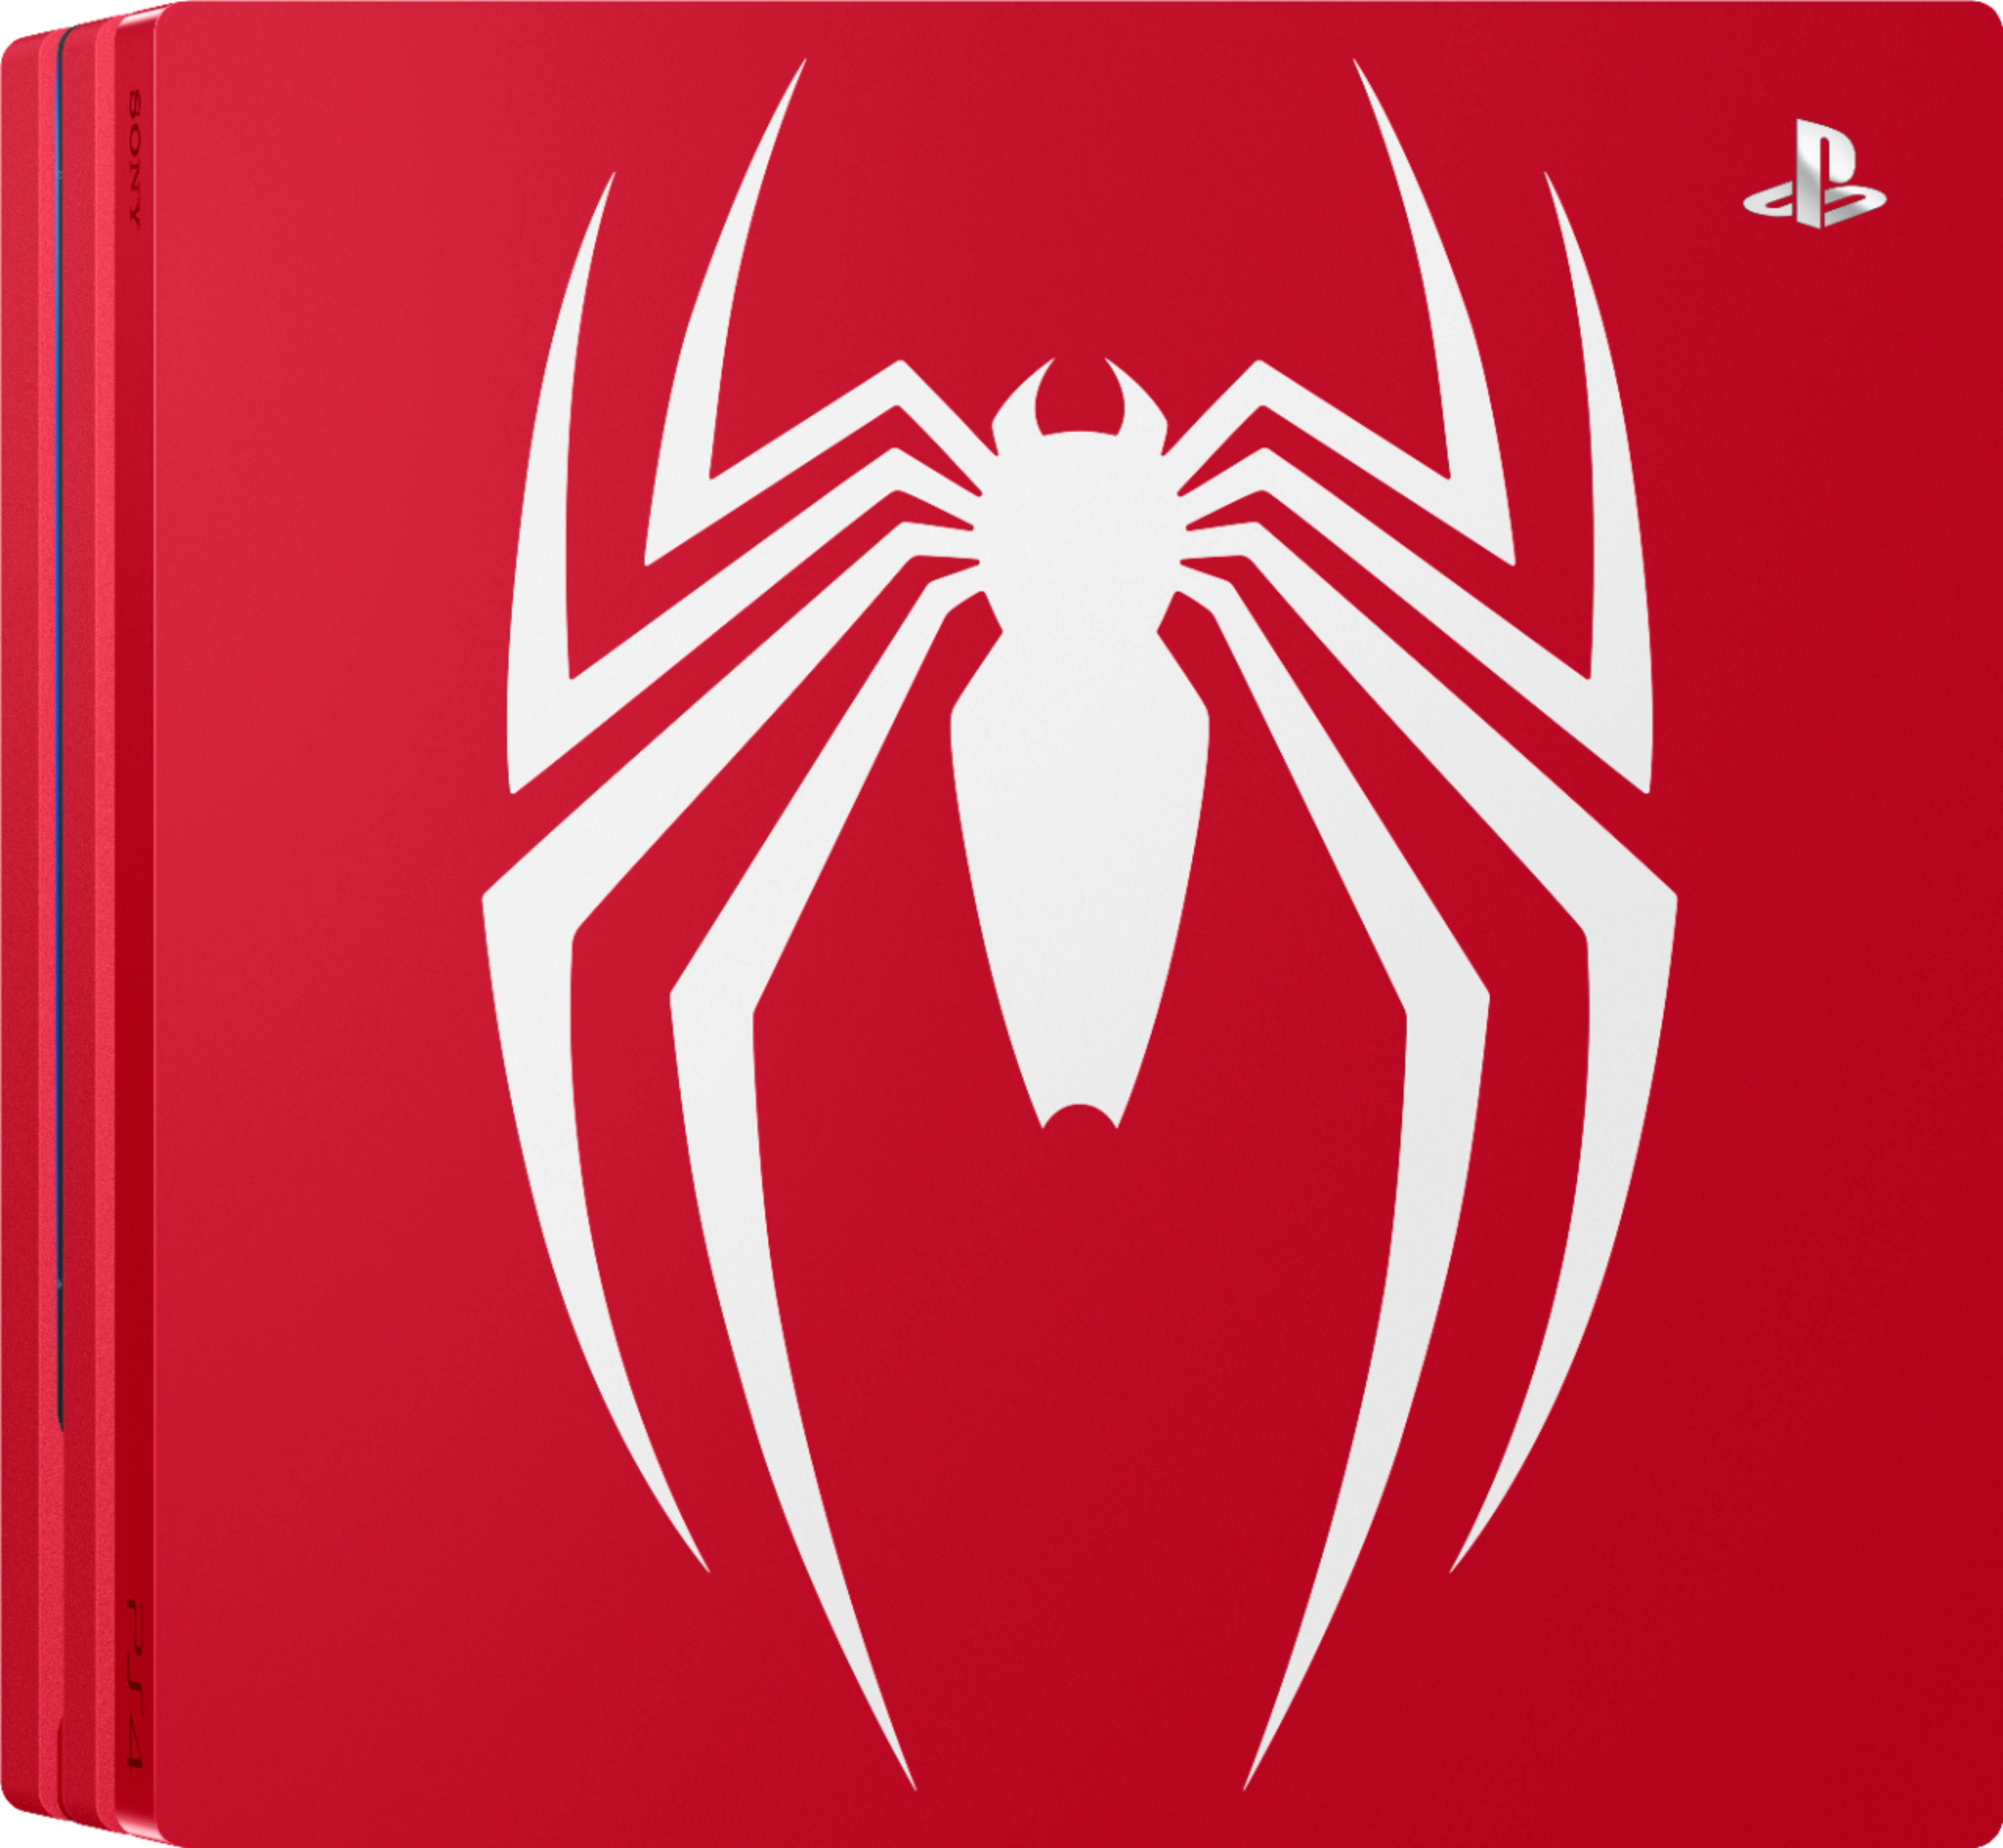 spider man ps4 collector's edition best buy